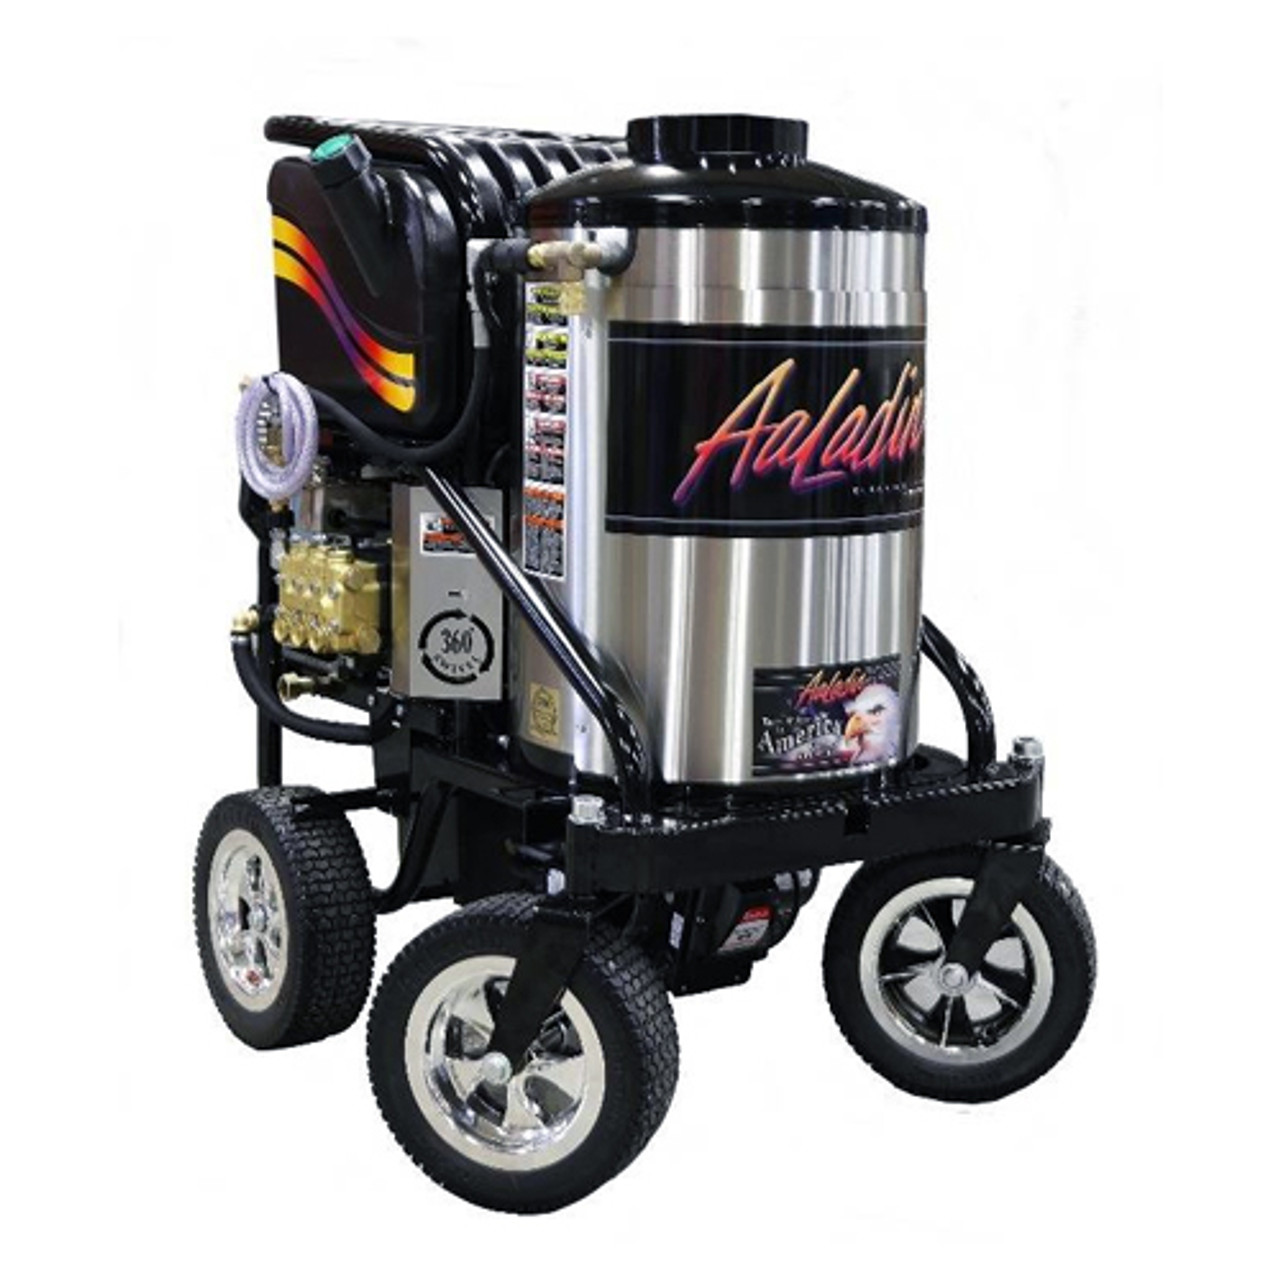 Aaladin - Oil Fired Portable Pressure Washer - 13-325SS